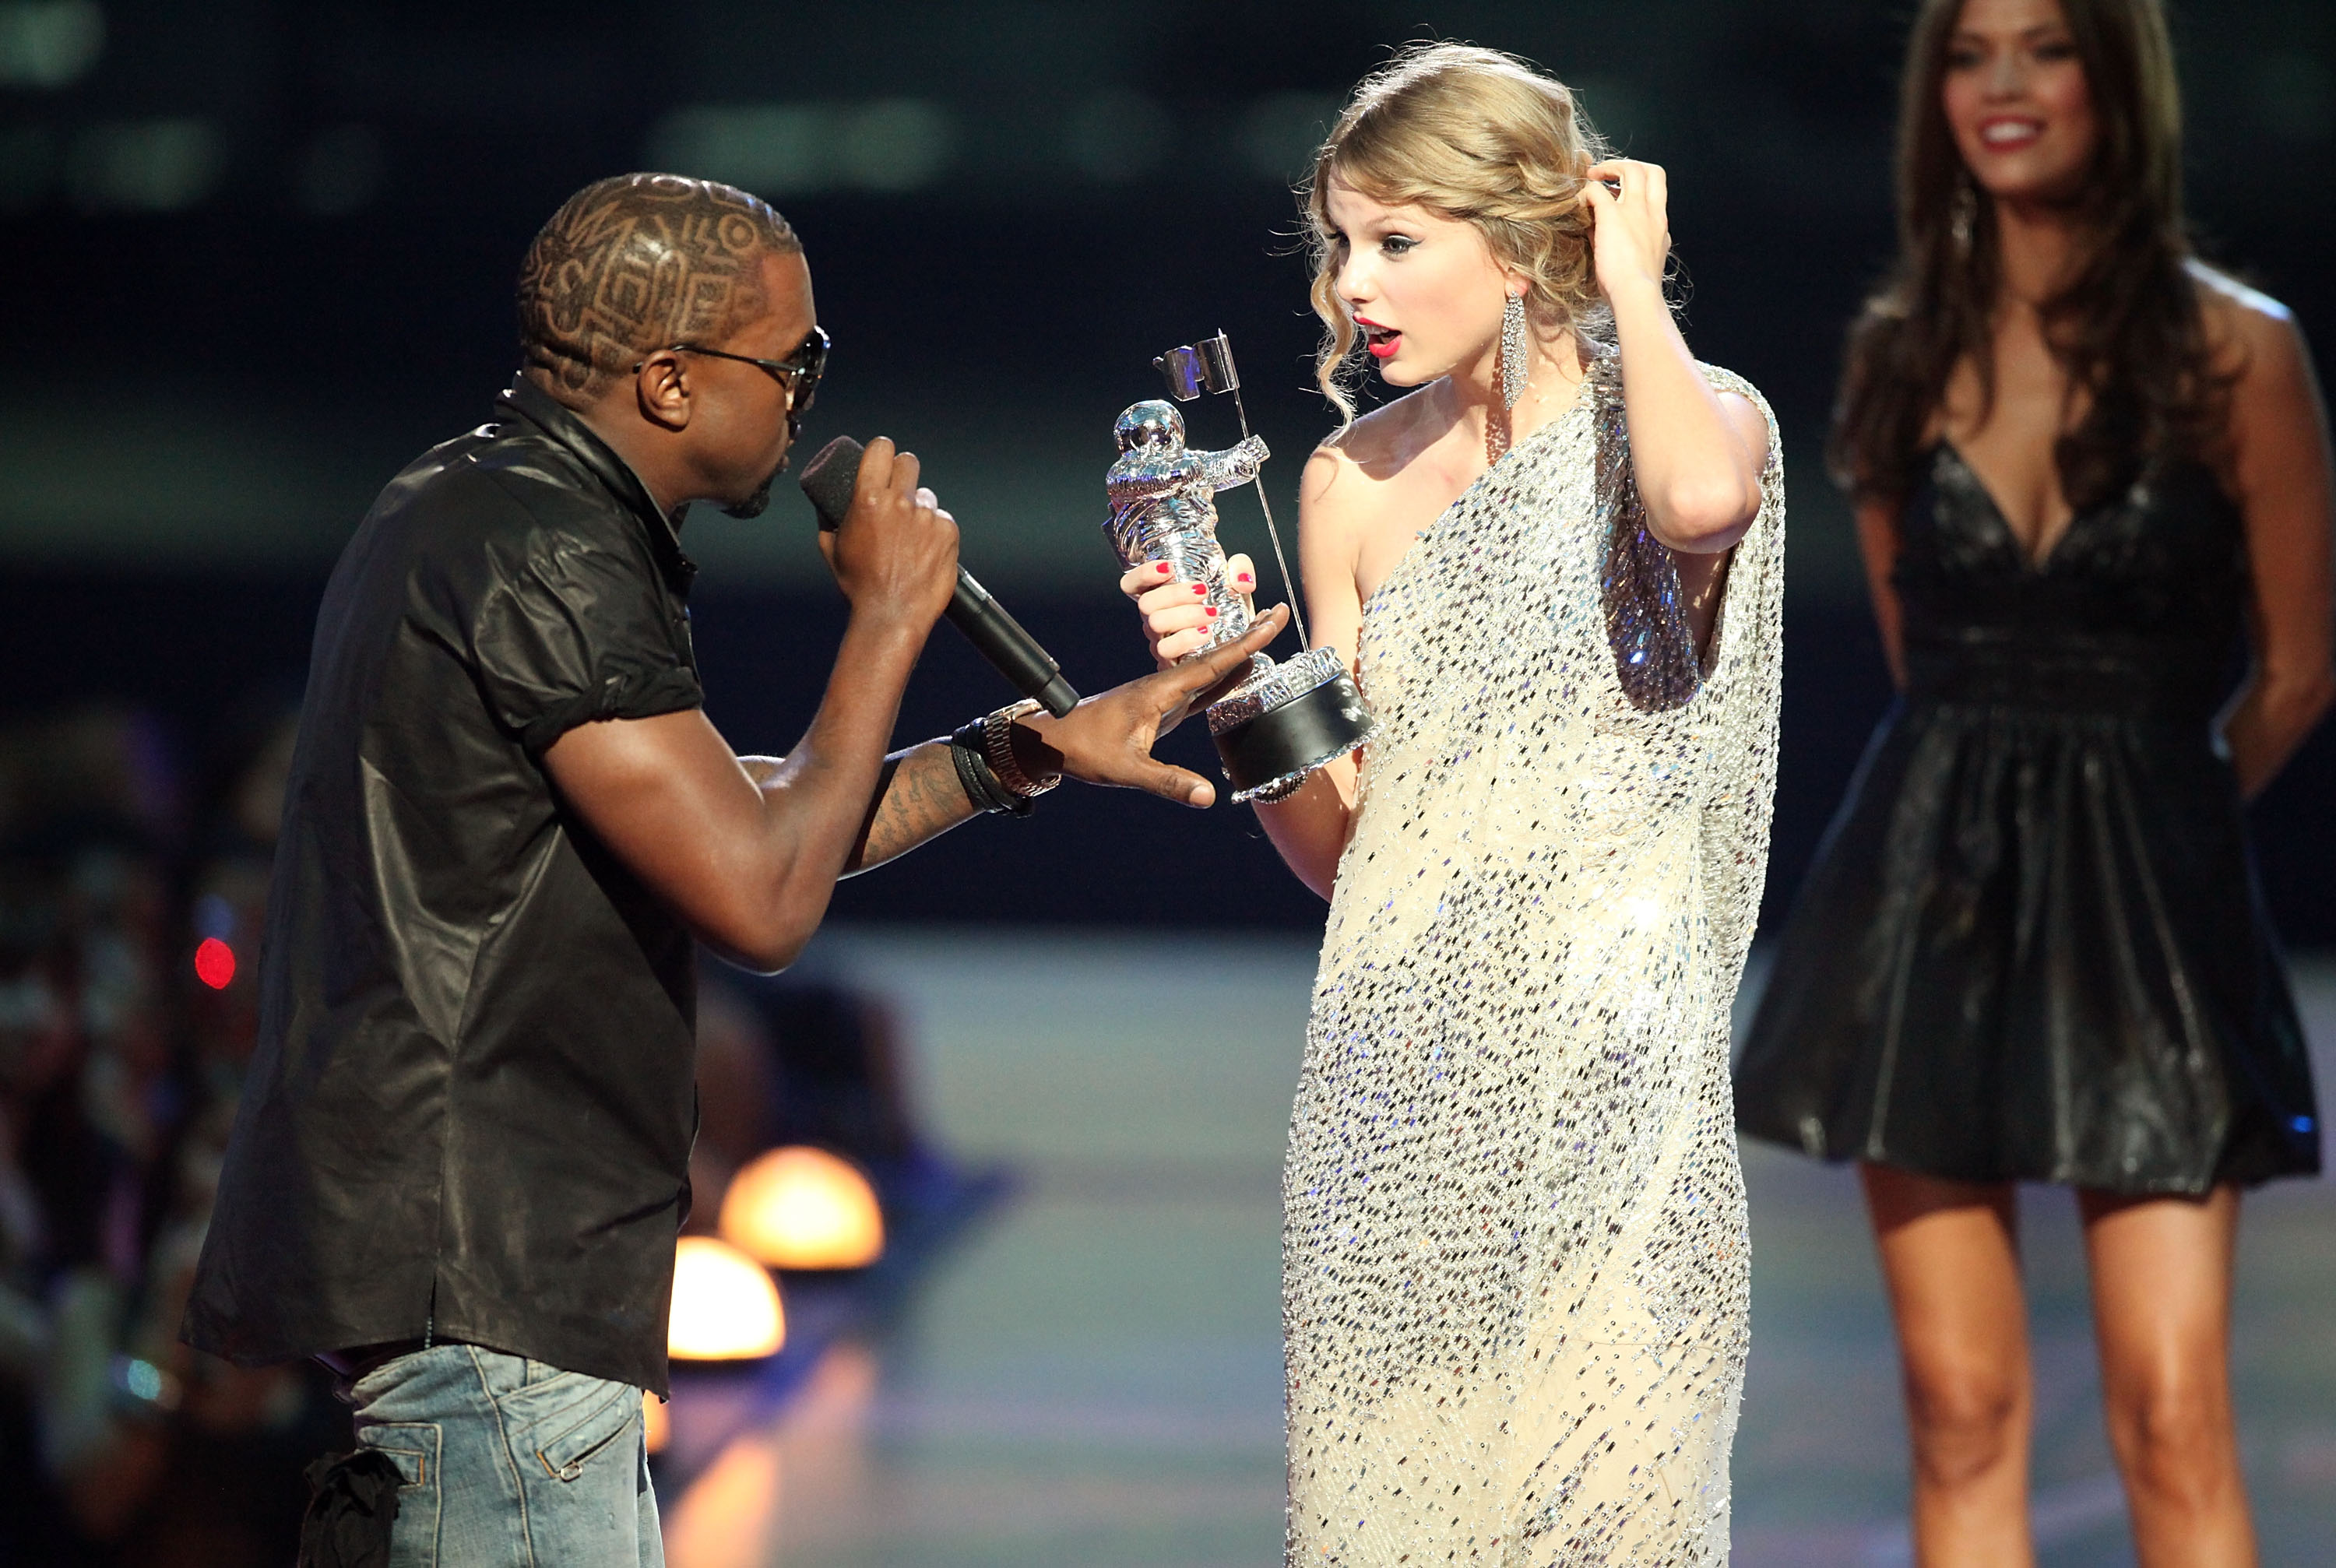 It S Been 5 Years Since Kanye West Interrupted Taylor Swift These Are The Best Memes Of The Event